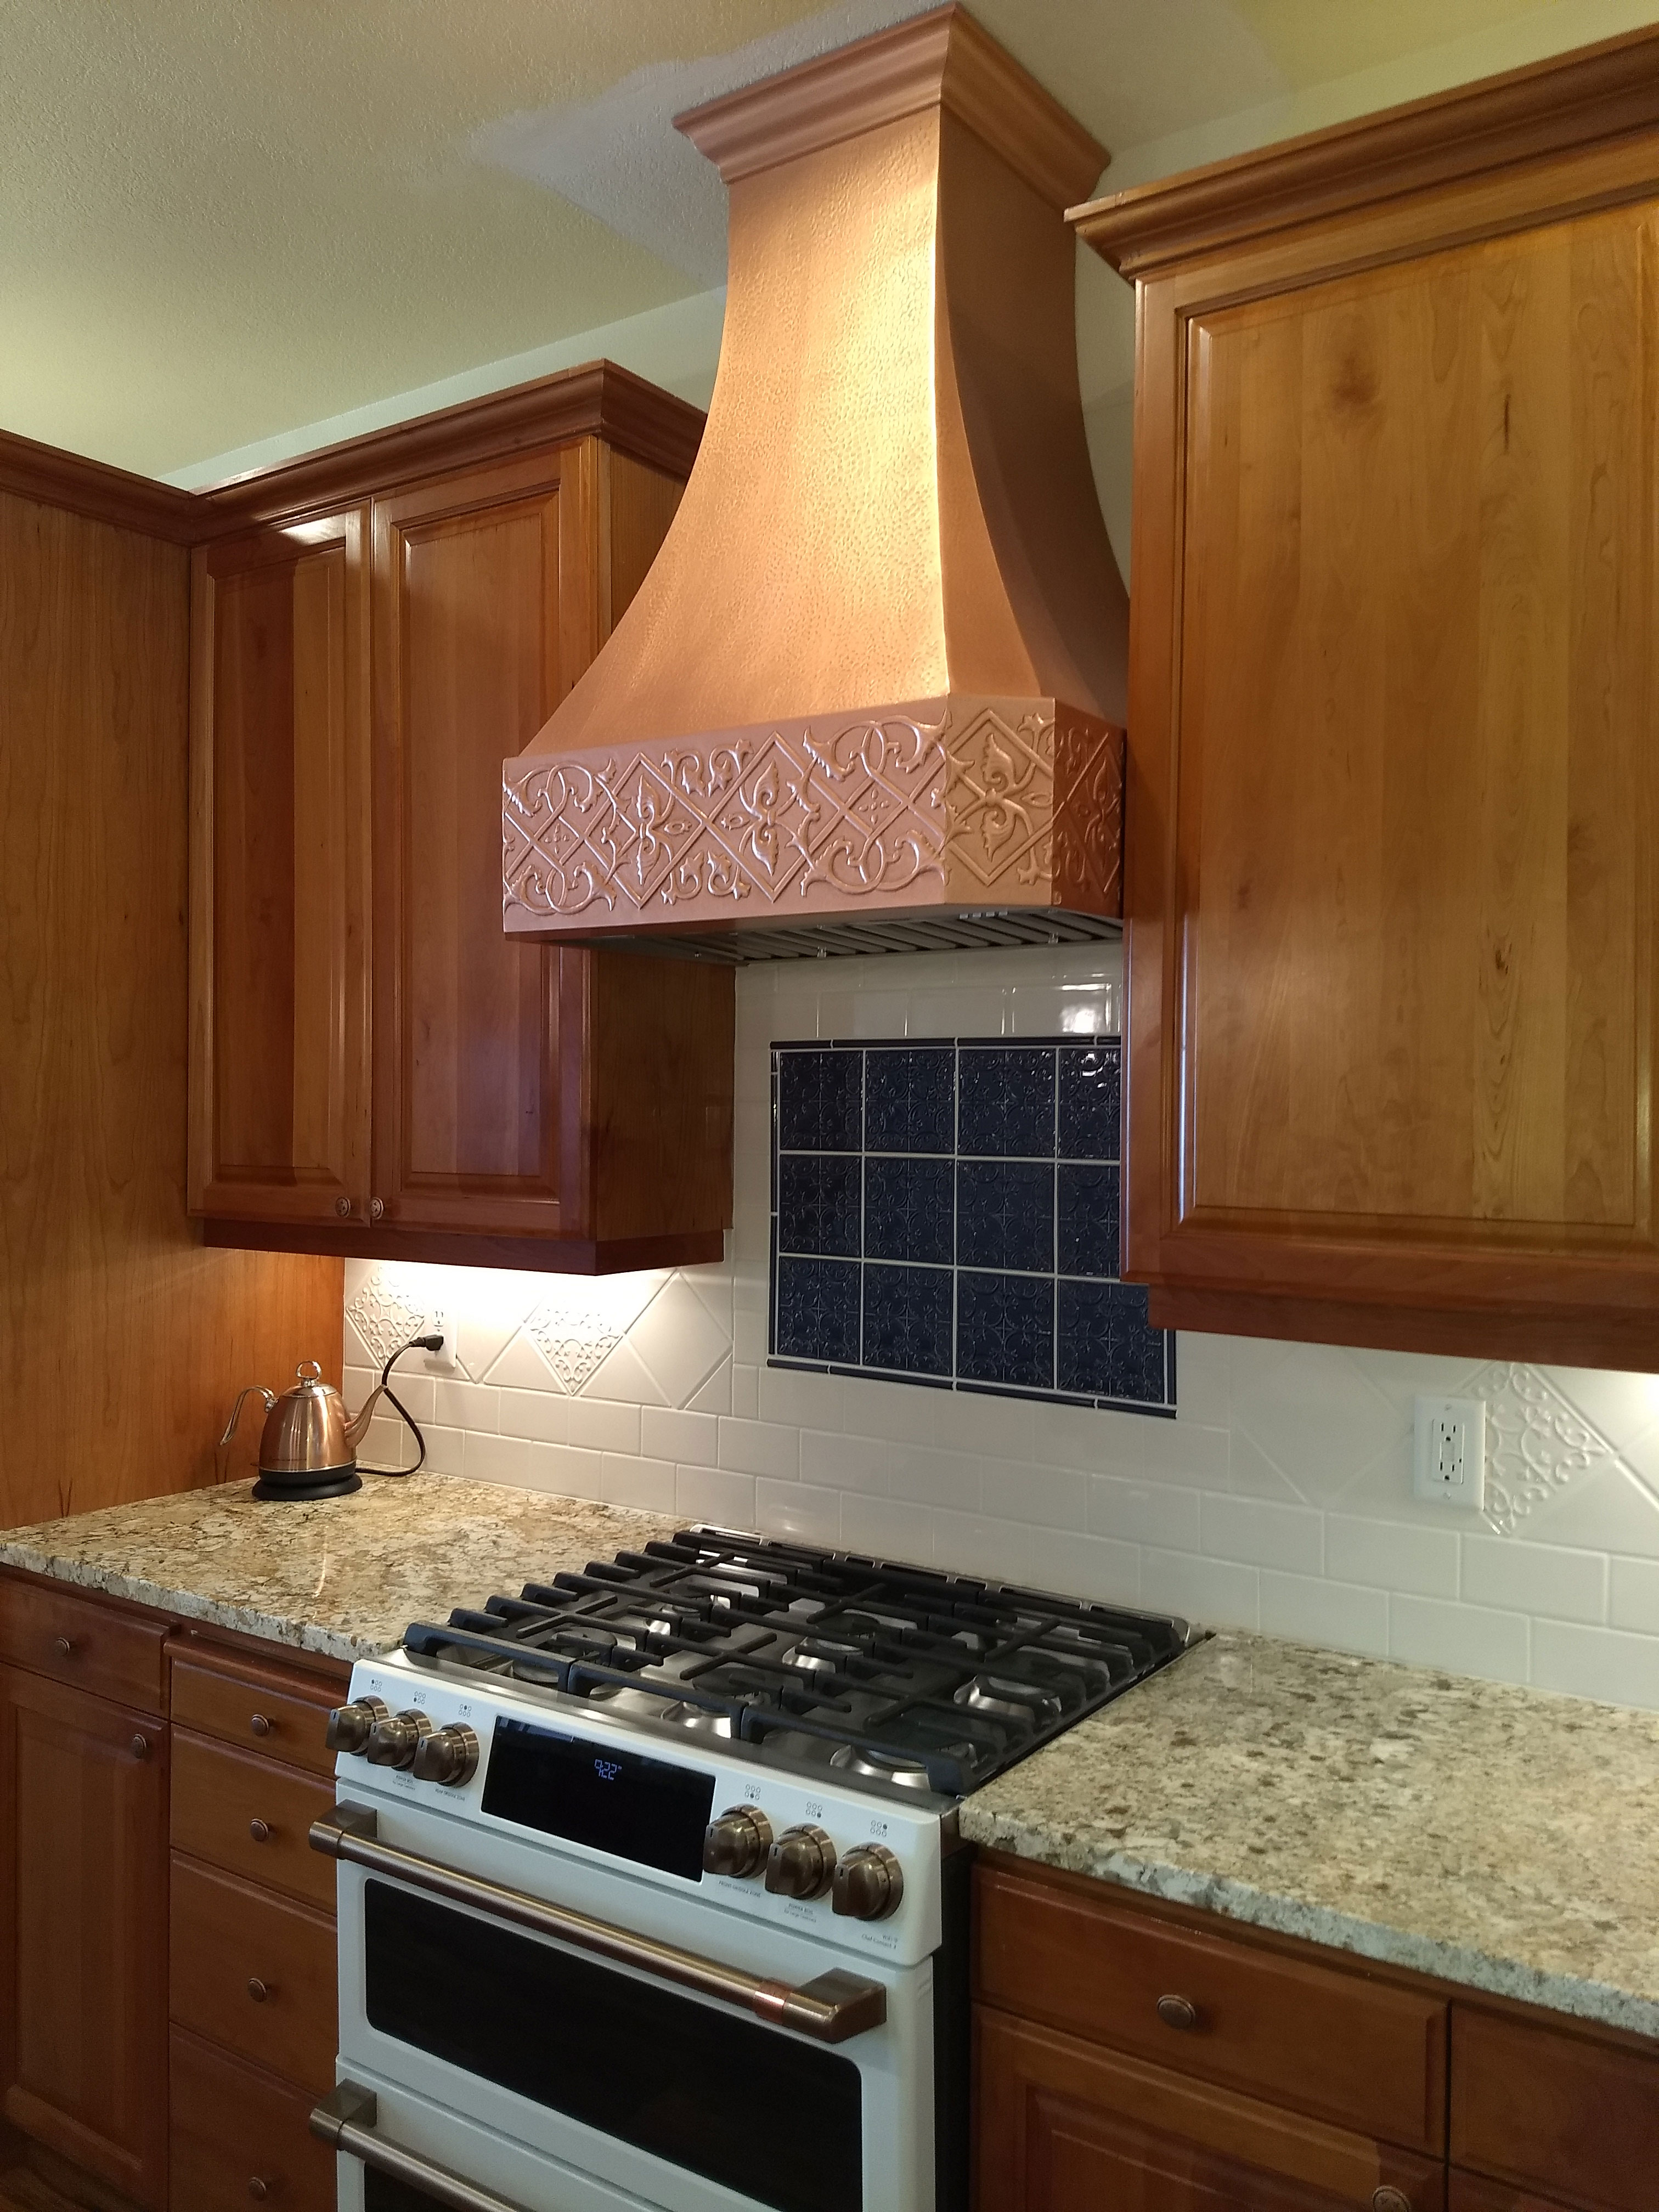 Copper range hood with geometric design in a kitchen with natural wood cabinets. World CopperSmith